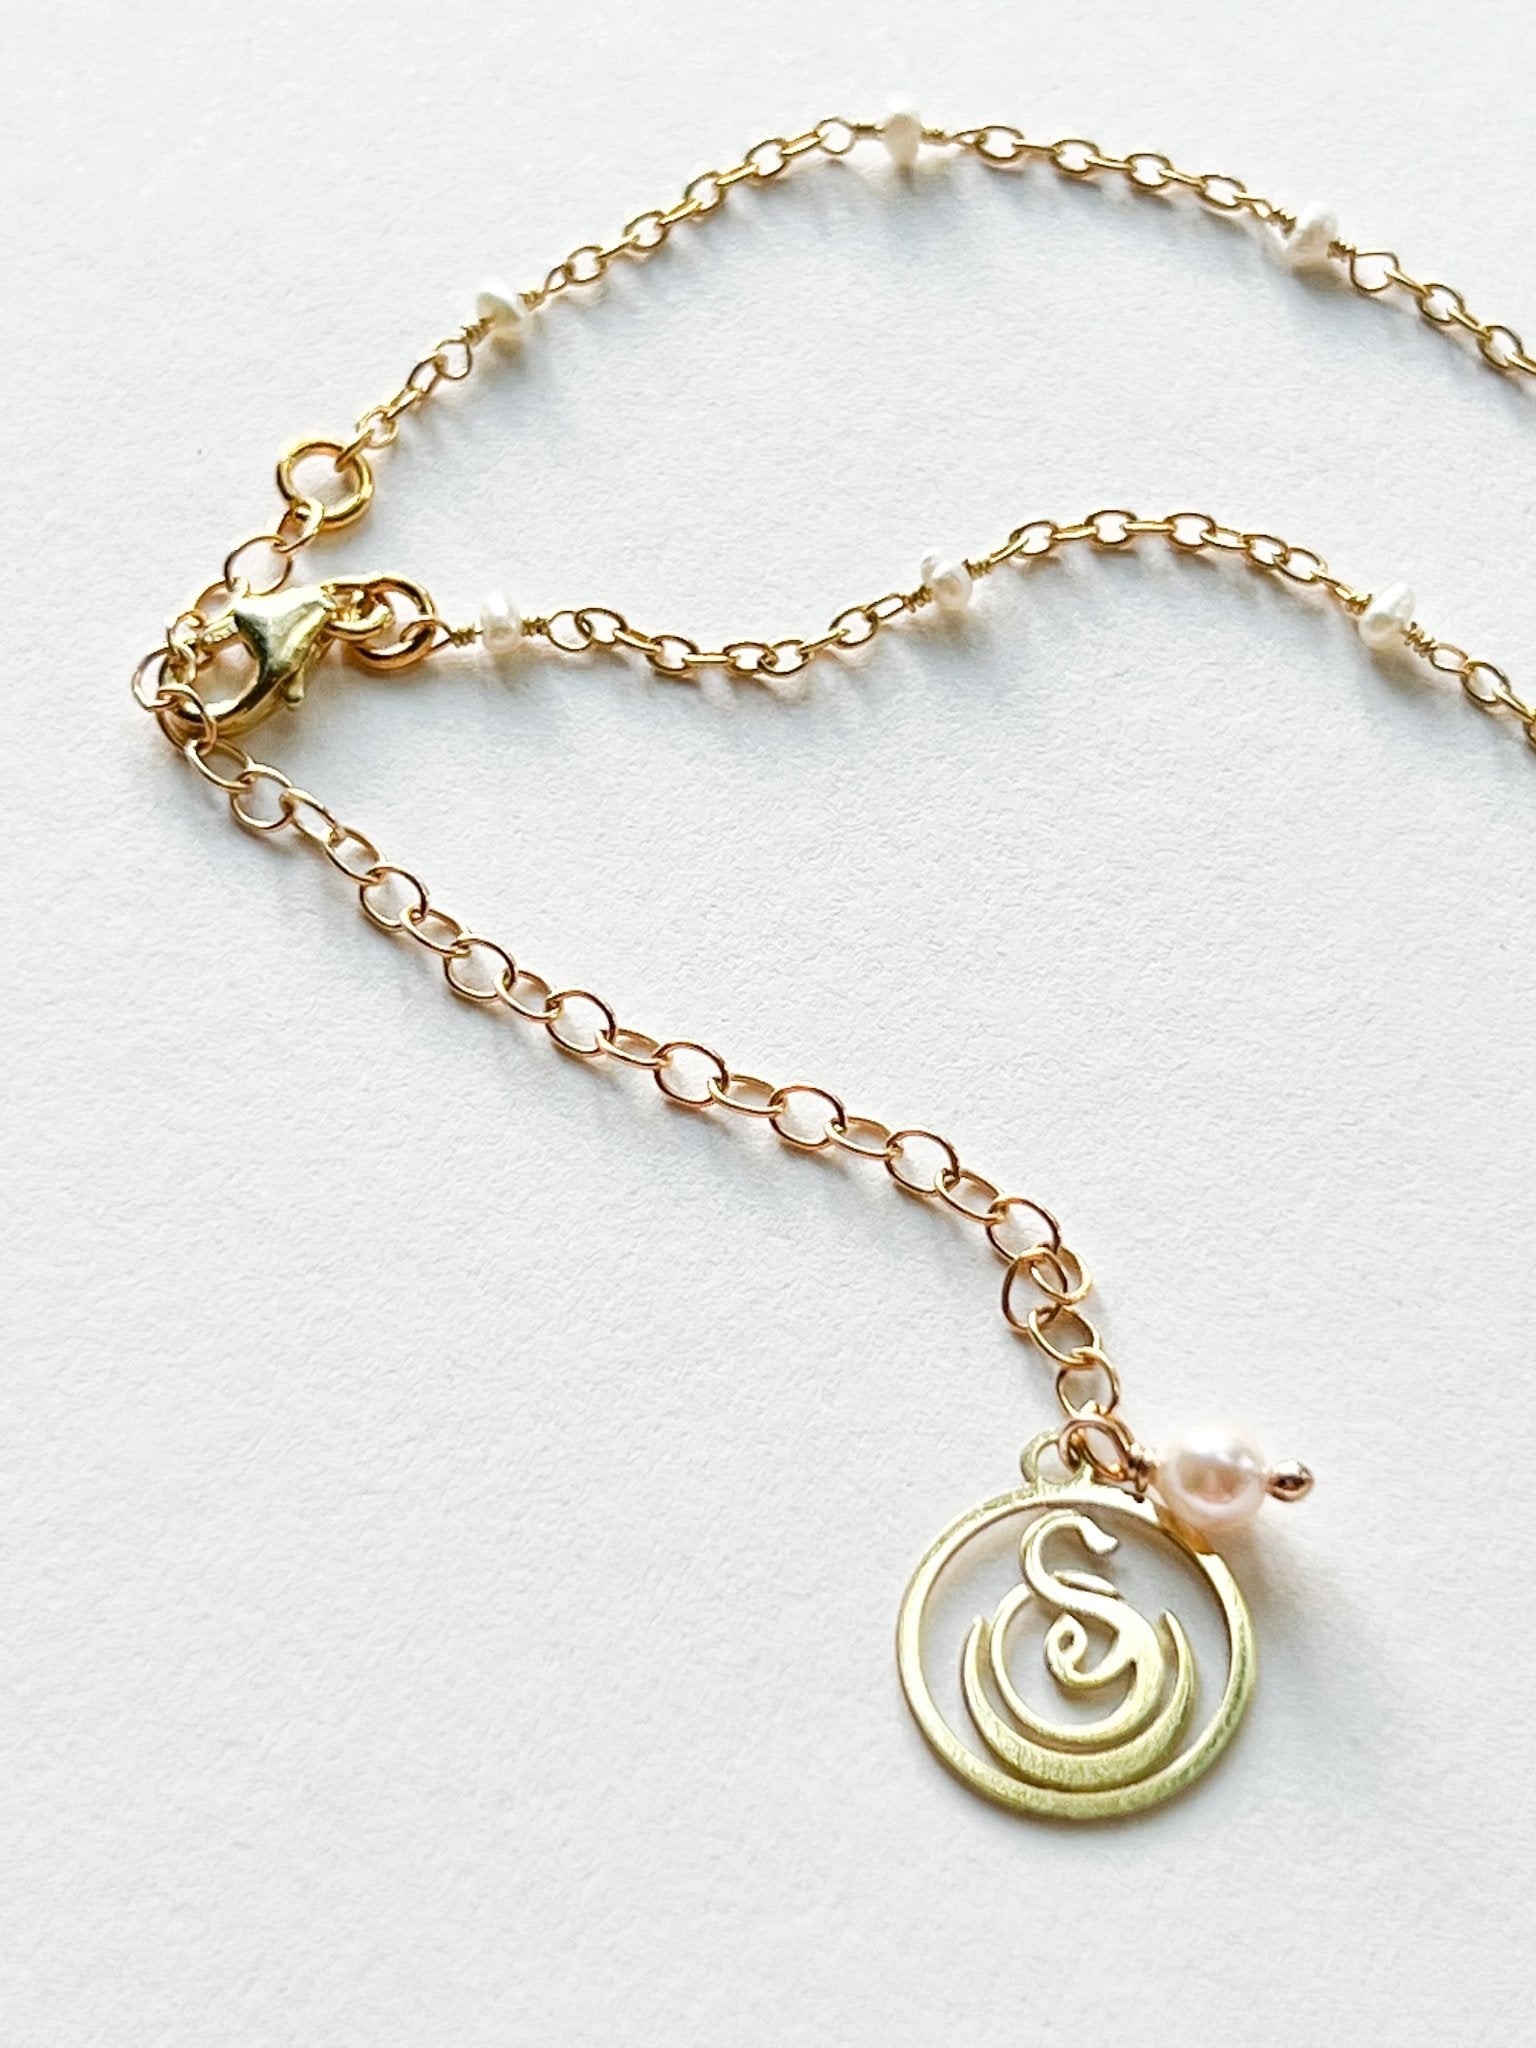 Citrine Teardrop Charm Necklace on Gold Chain with White Freshwater Pearls by Sage Machado - The Sage Lifestyle